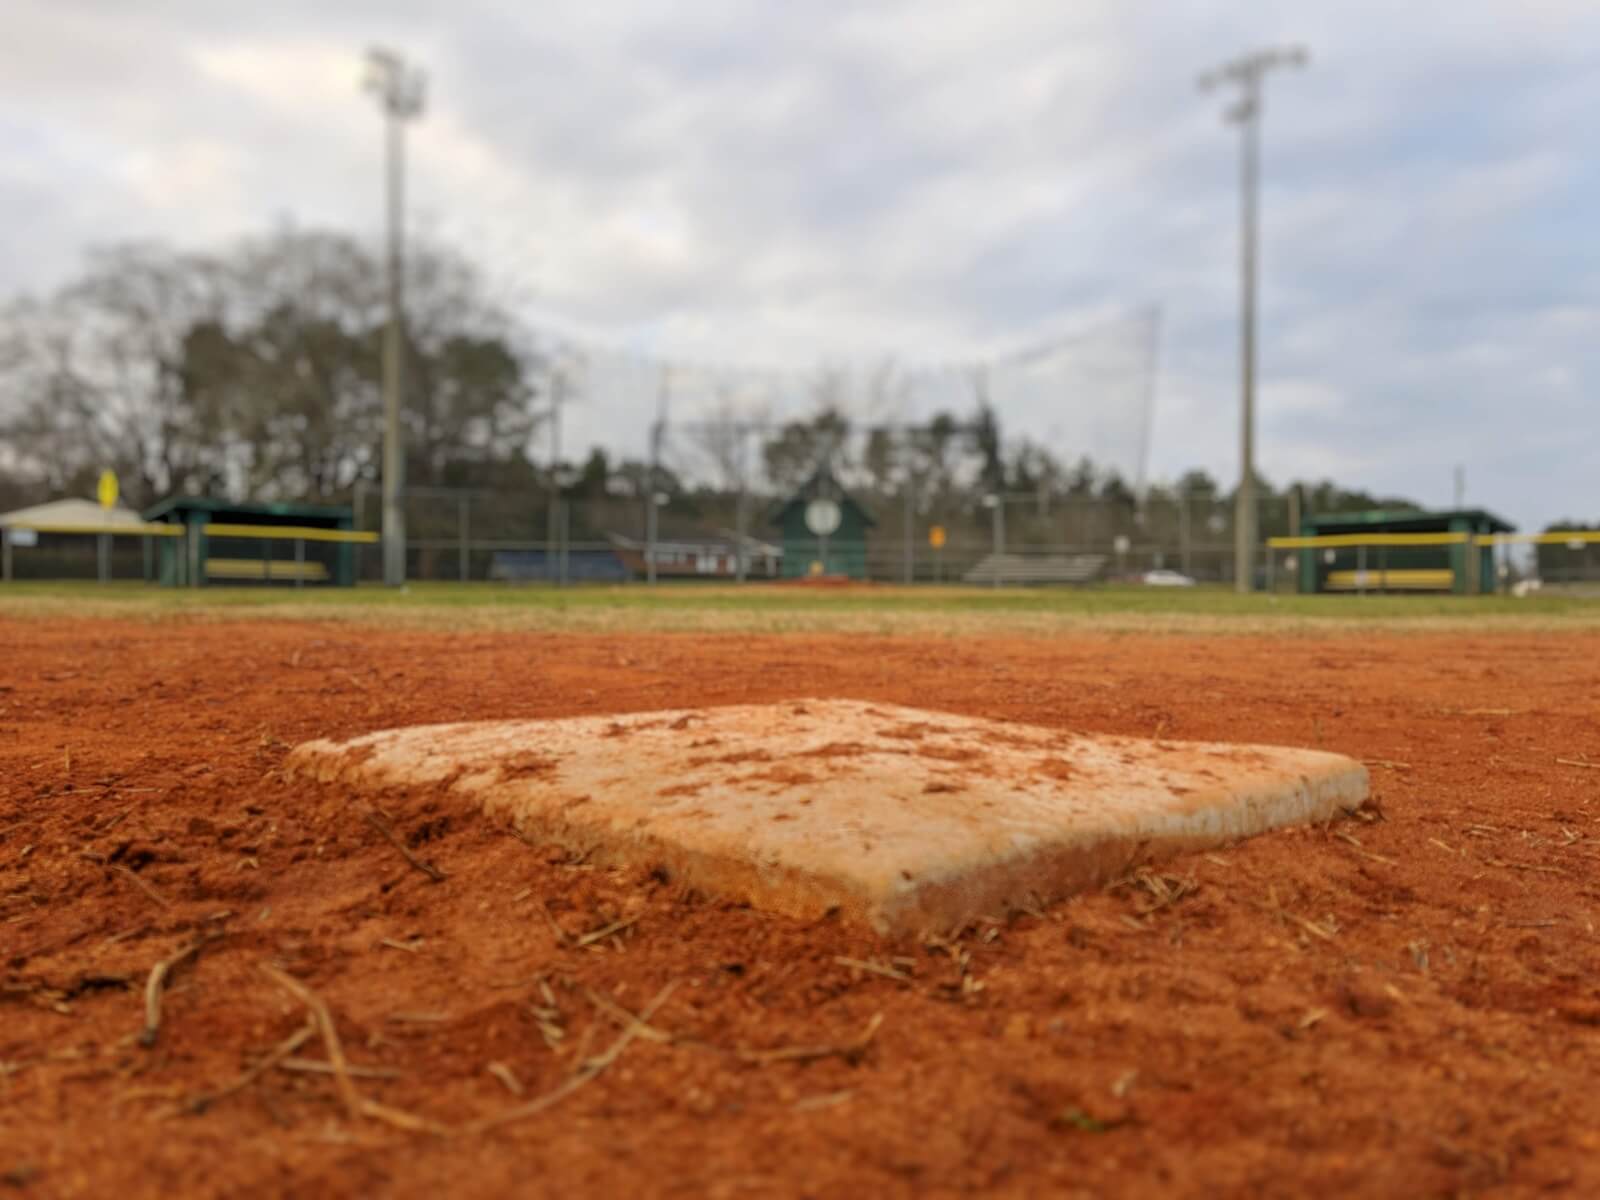 image of second base at ground level